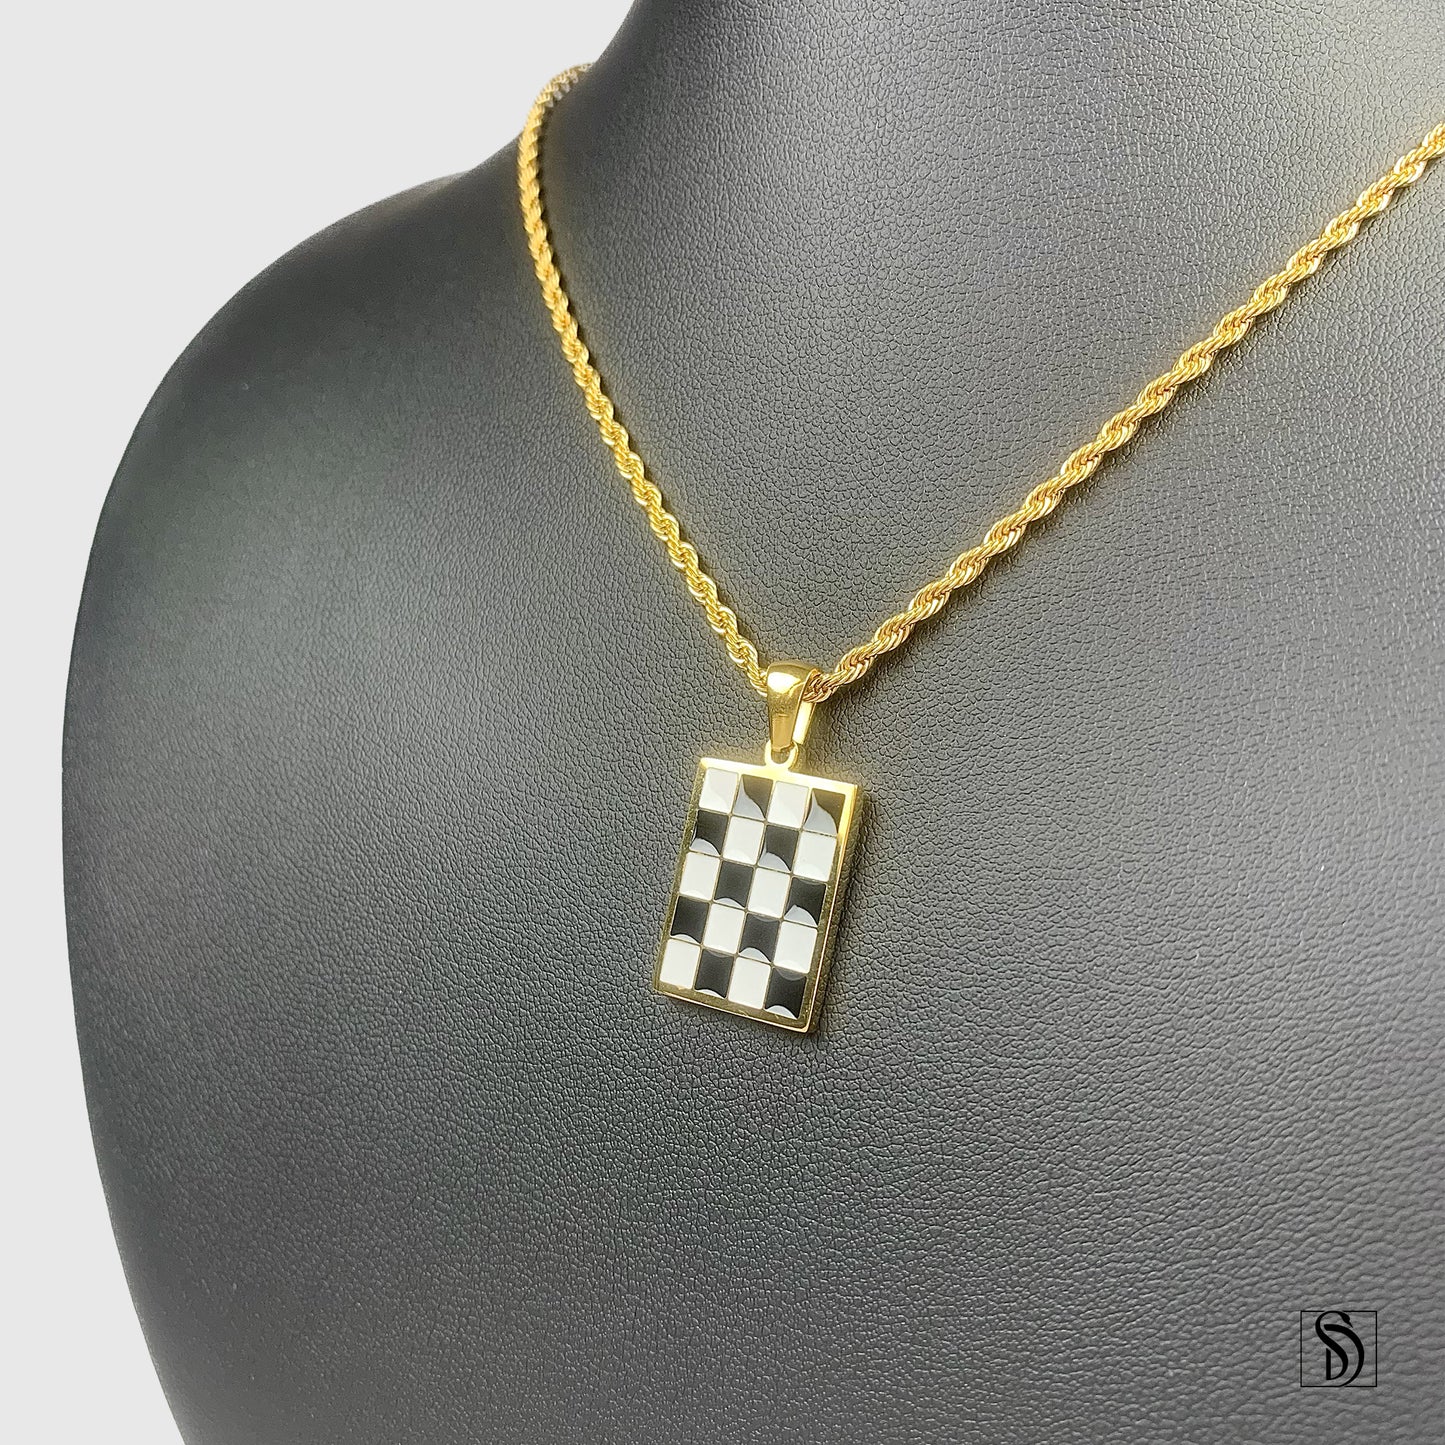 Black and White Chess Board Pendant Necklace